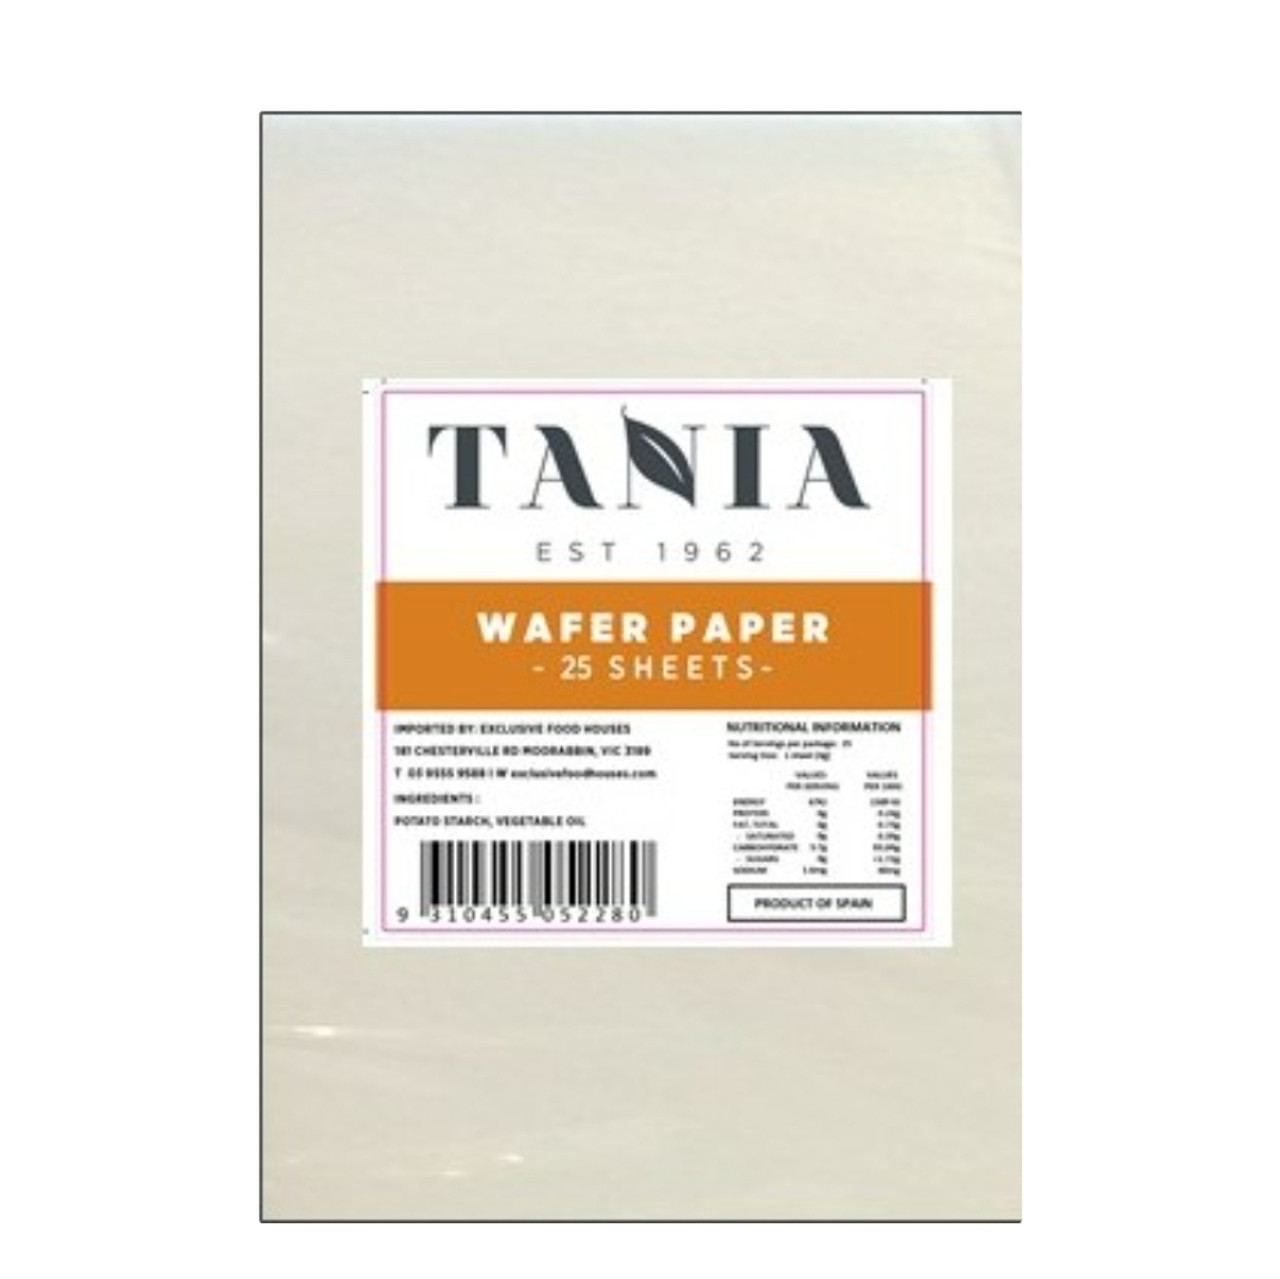 Tania Rice Wafer Paper 25 Pieces 200g - The Red Spoon Co